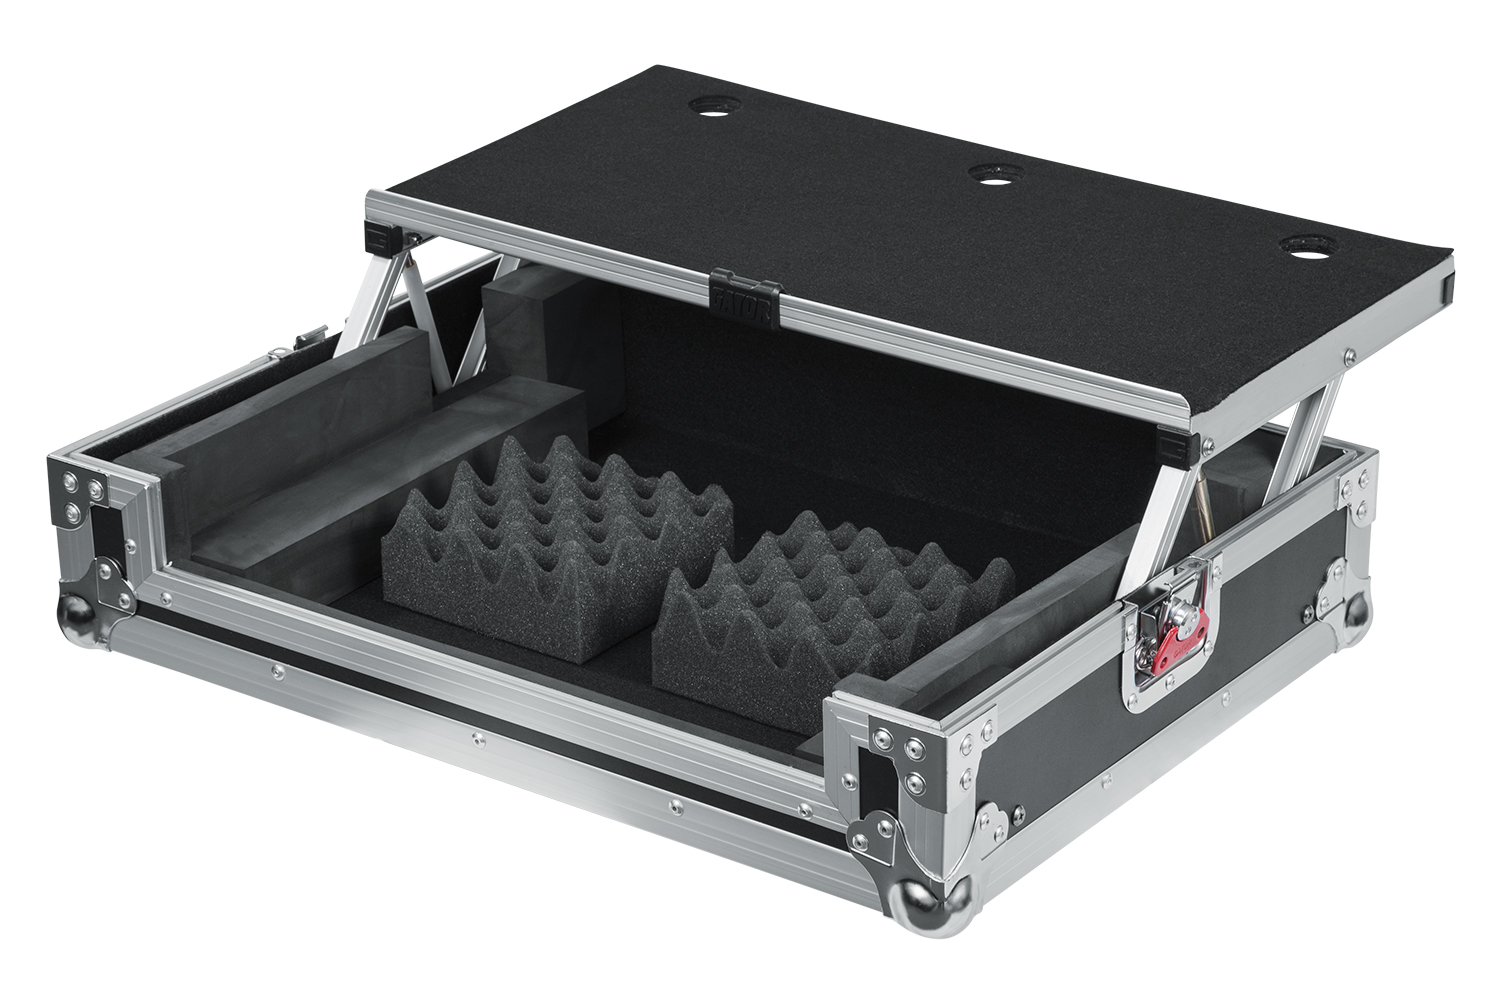 G-TOUR DSP case for small sized DJ controllers